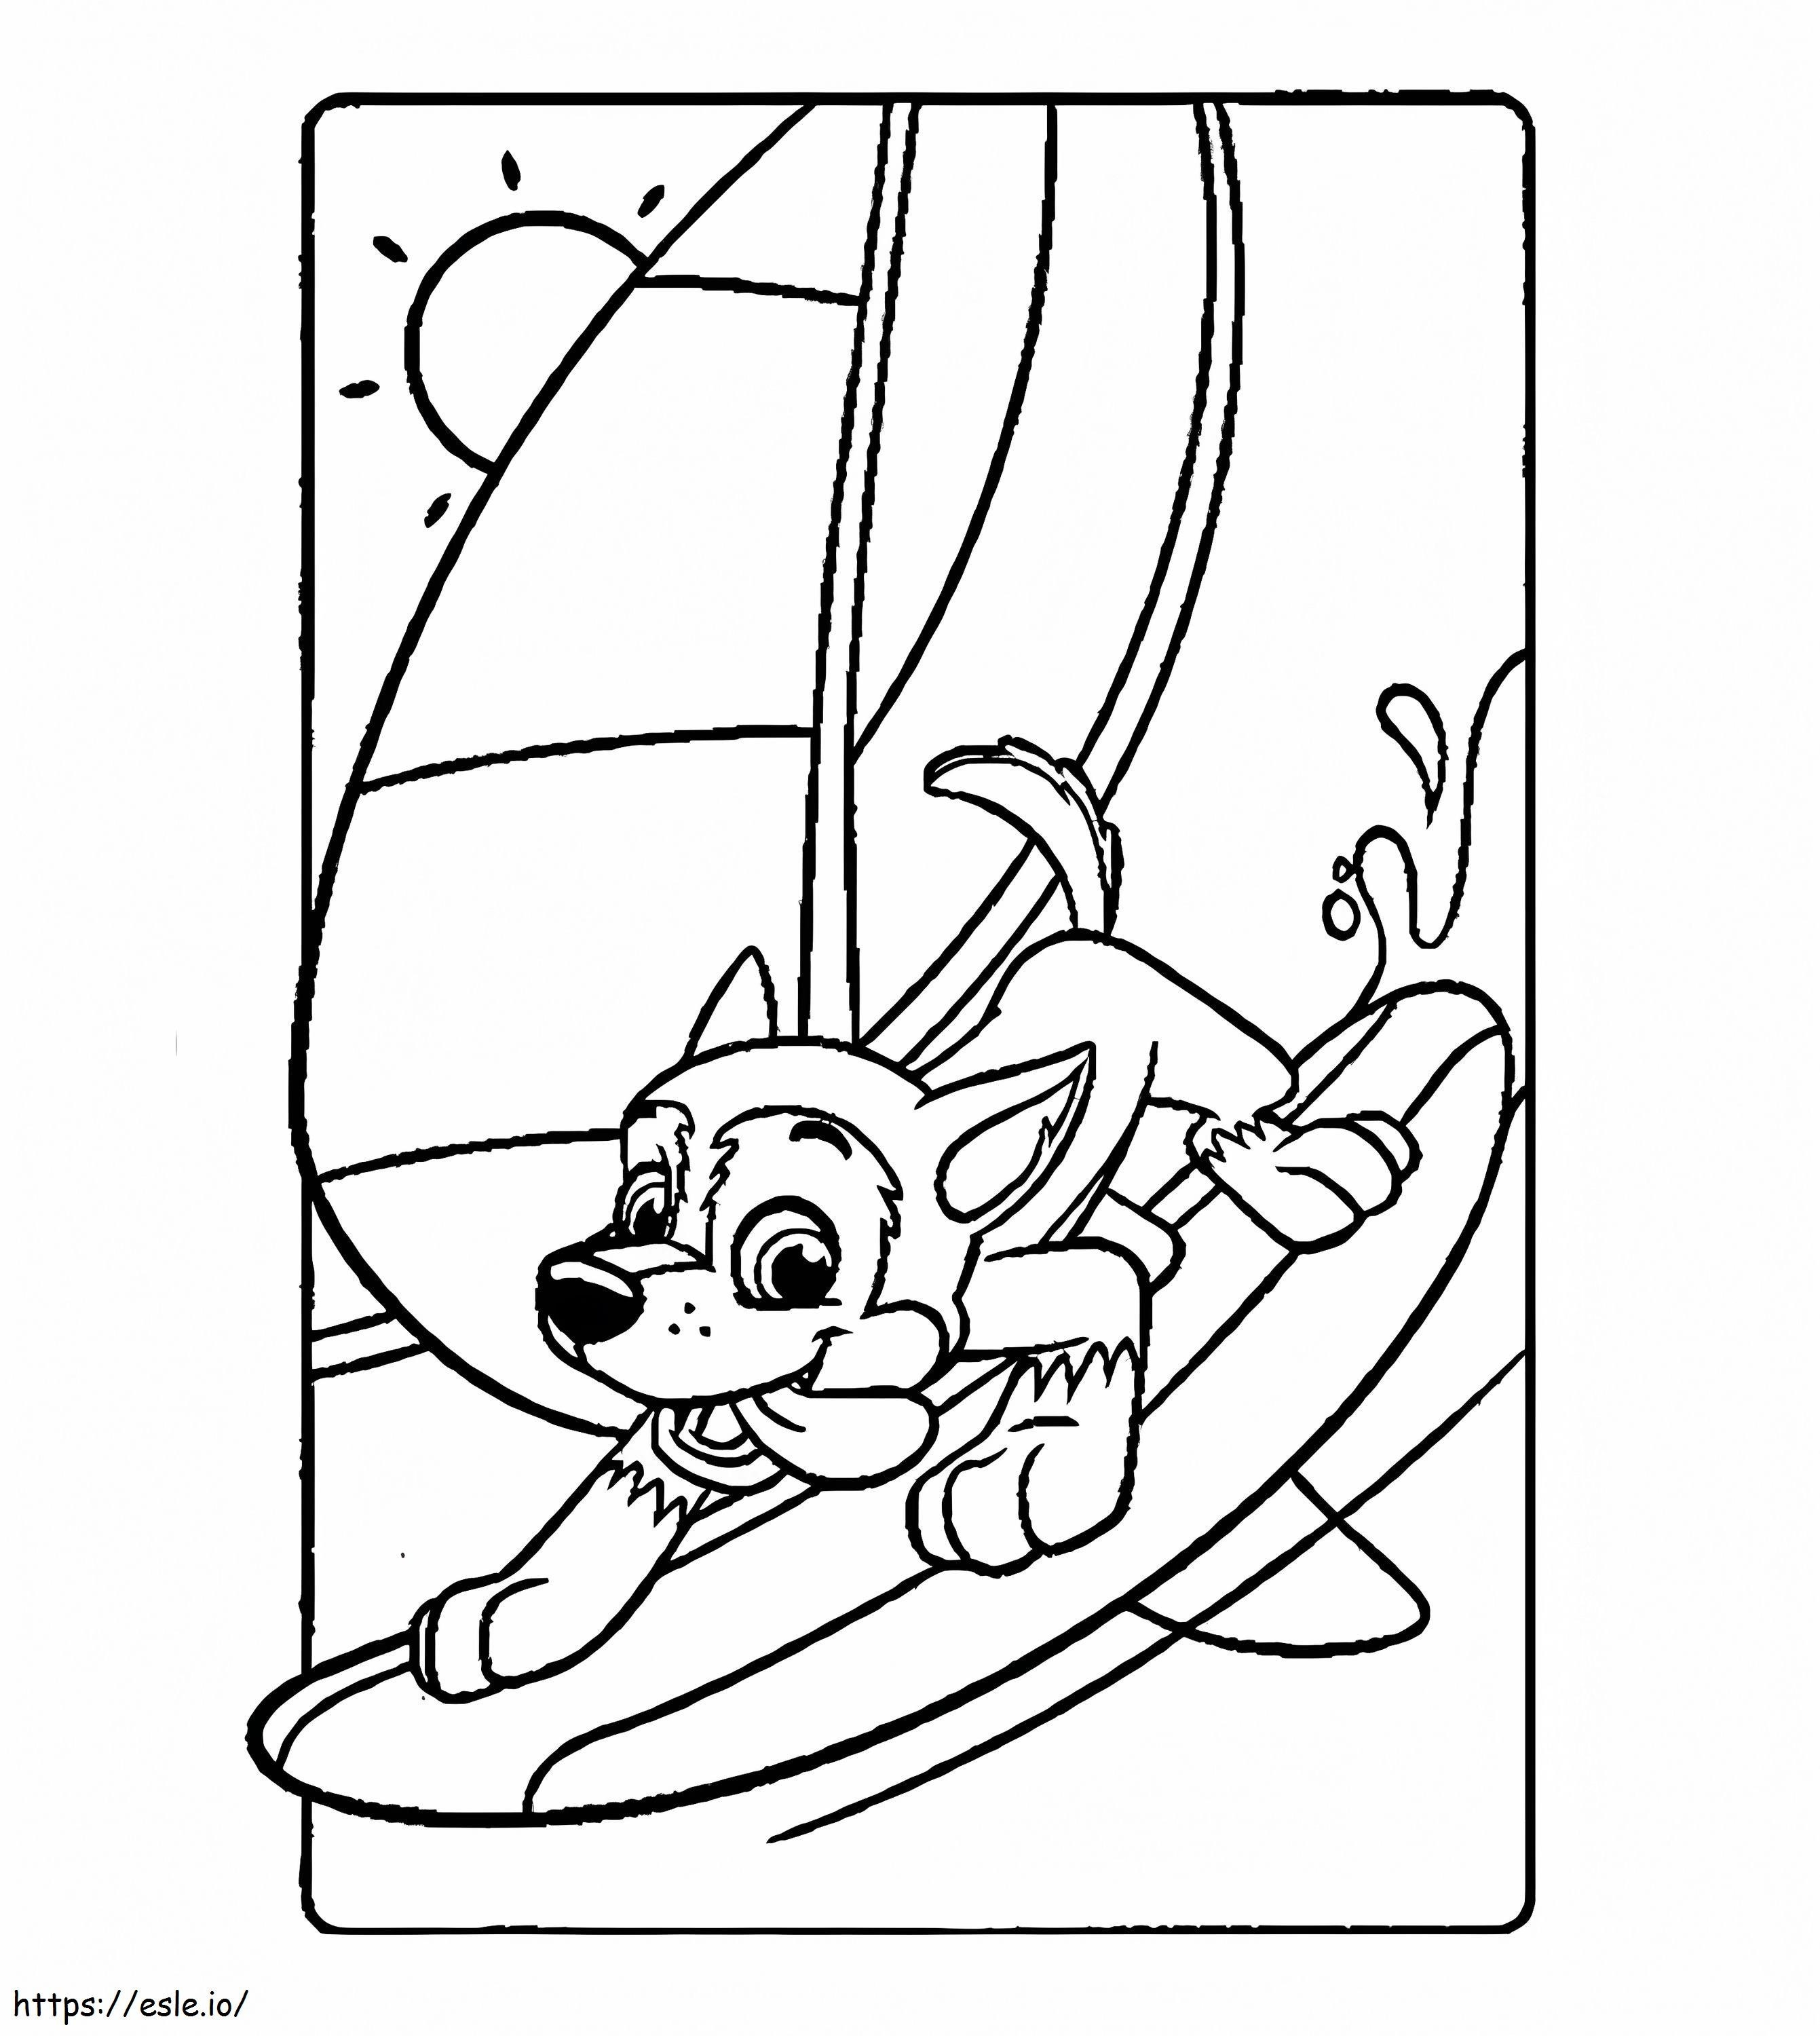 Chase Paw Patrol 36 coloring page